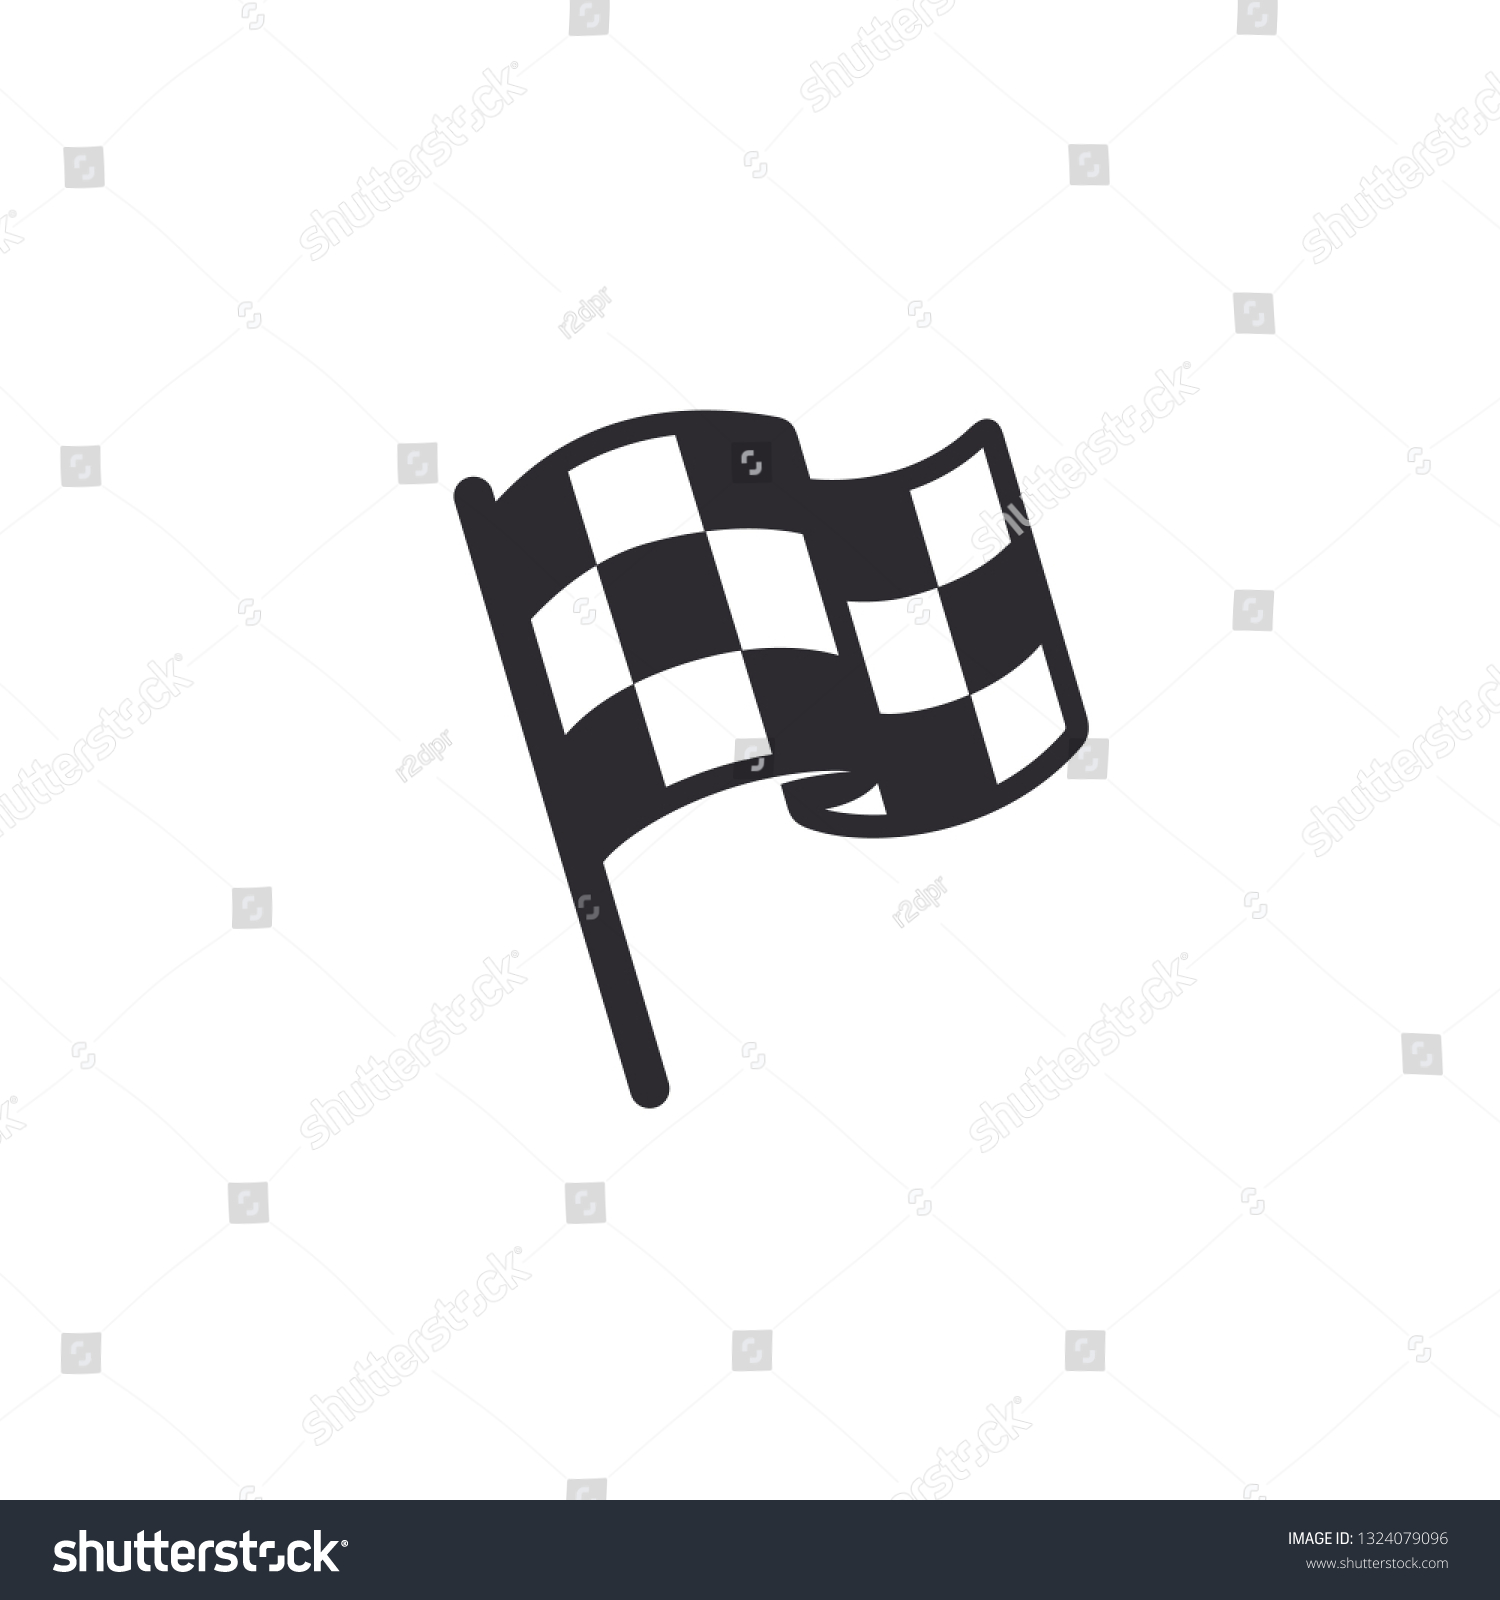 SVG of Flag icon. Racing sign. Checkered racing flag. Chequered racing flag on flagstaff. Black and white flag. Vector illustration. Finish, start mark. Racing symbol. Competition symbol. Game icon. svg